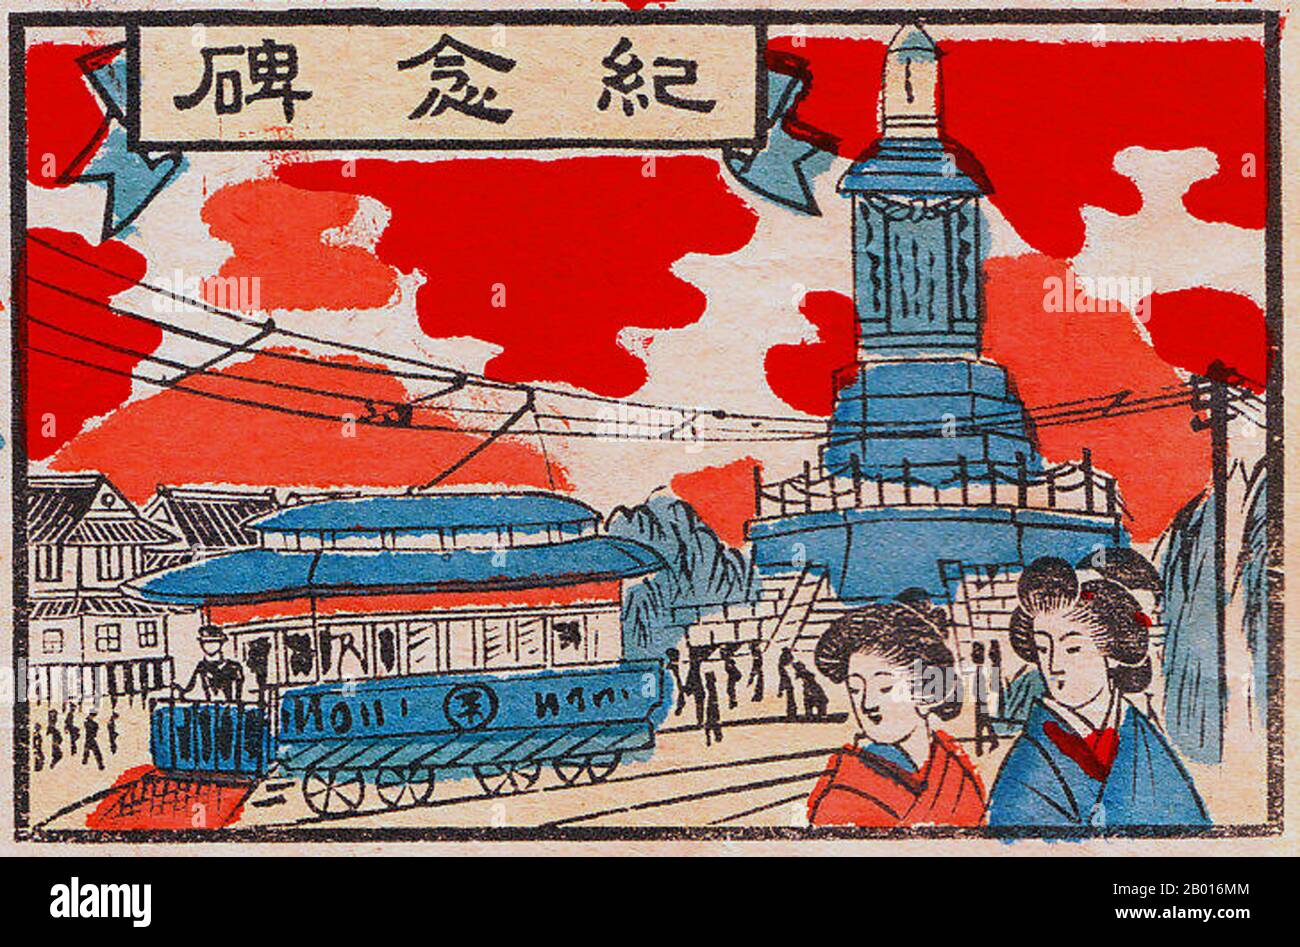 Japan: 'Memorial Monument to First Sino-Japanese War (1894 – 1895), Nagoya'. Ukiyo-e woodblock print, 1914.  The First Sino-Japanese War (1 August 1894 - 17 April 1895) was fought between Qing Dynasty China and Meiji Japan, primarily over control of Korea. After more than six months of continuous successes by Japanese army and naval forces and the loss of the Chinese port of Weihaiwei, the Qing leadership sued for peace in February 1895. Stock Photo